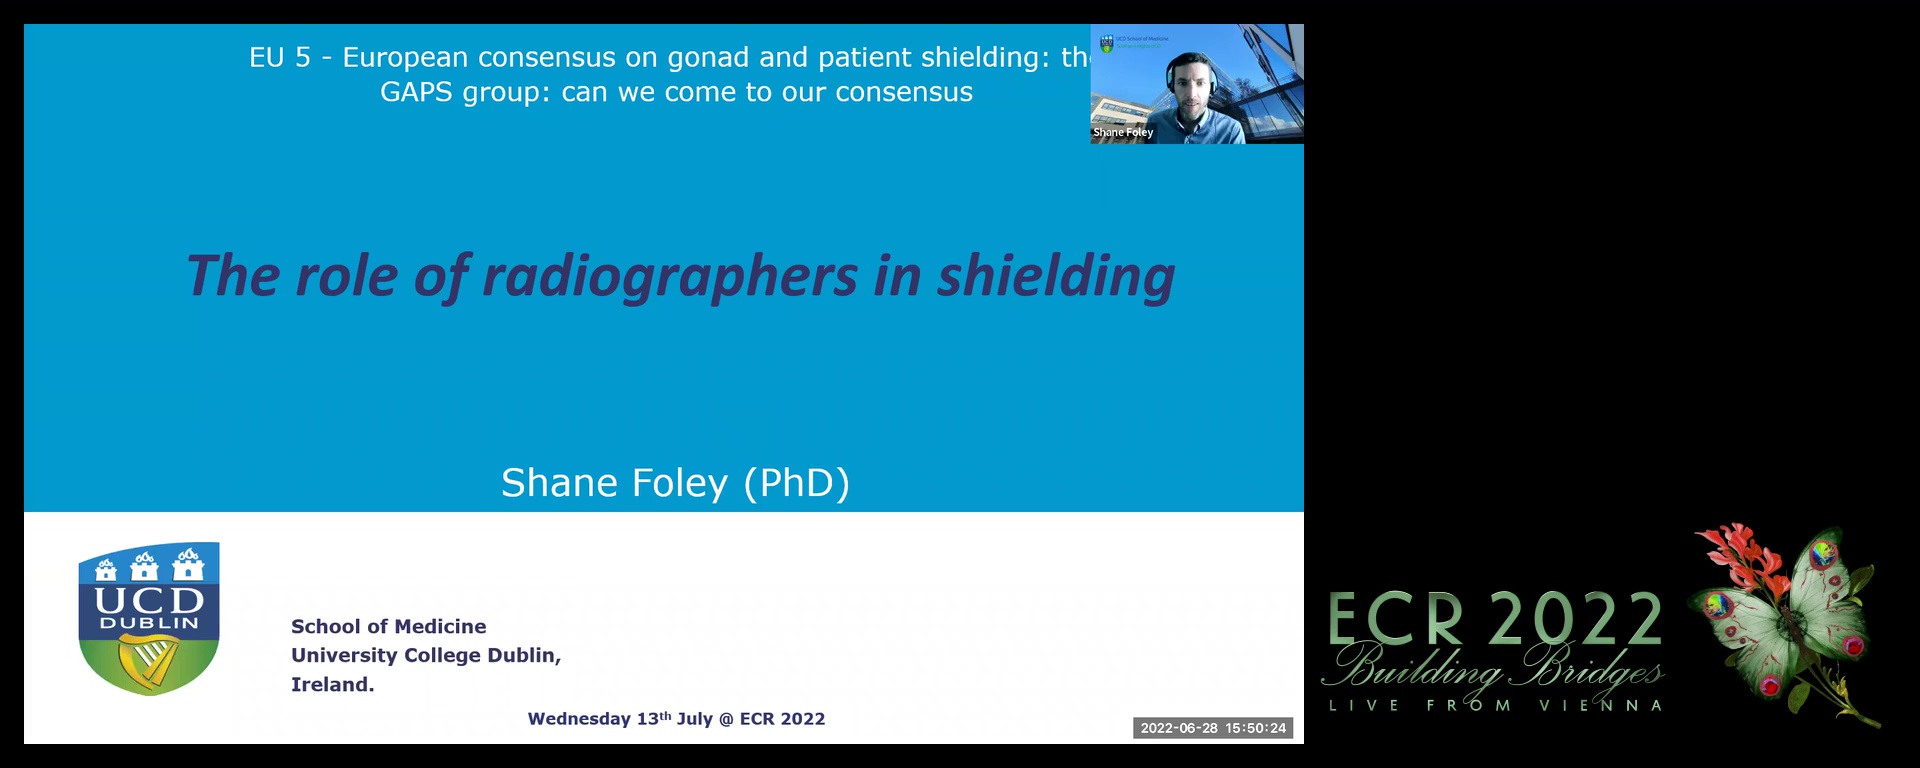 The role of the radiographer in shielding - Shane J. Foley, Dublin / IE